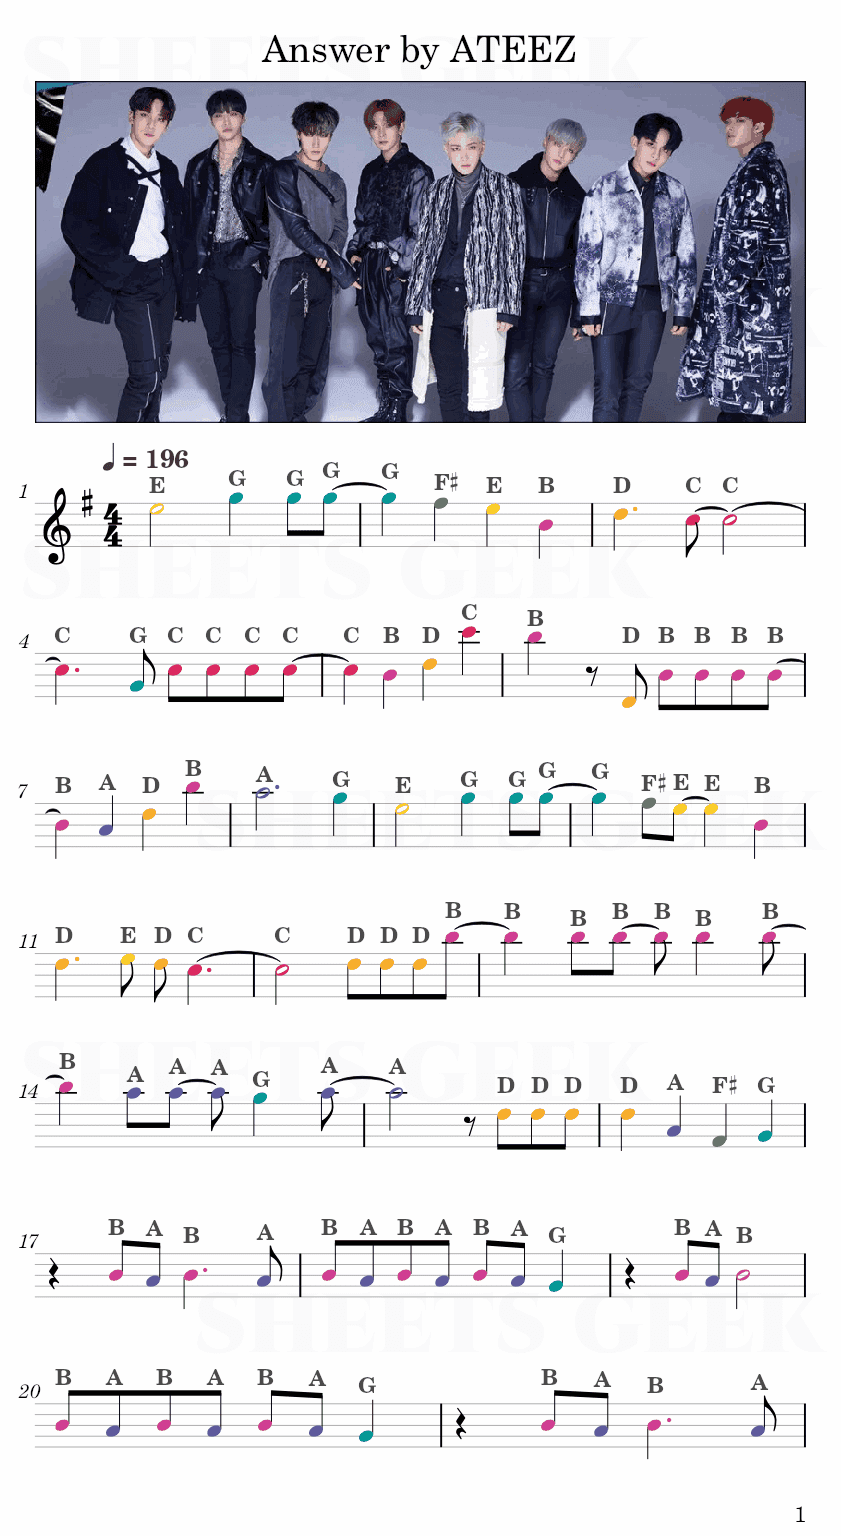 Answer by ATEEZ Easy Sheet Music Free for piano, keyboard, flute, violin, sax, cello page 1